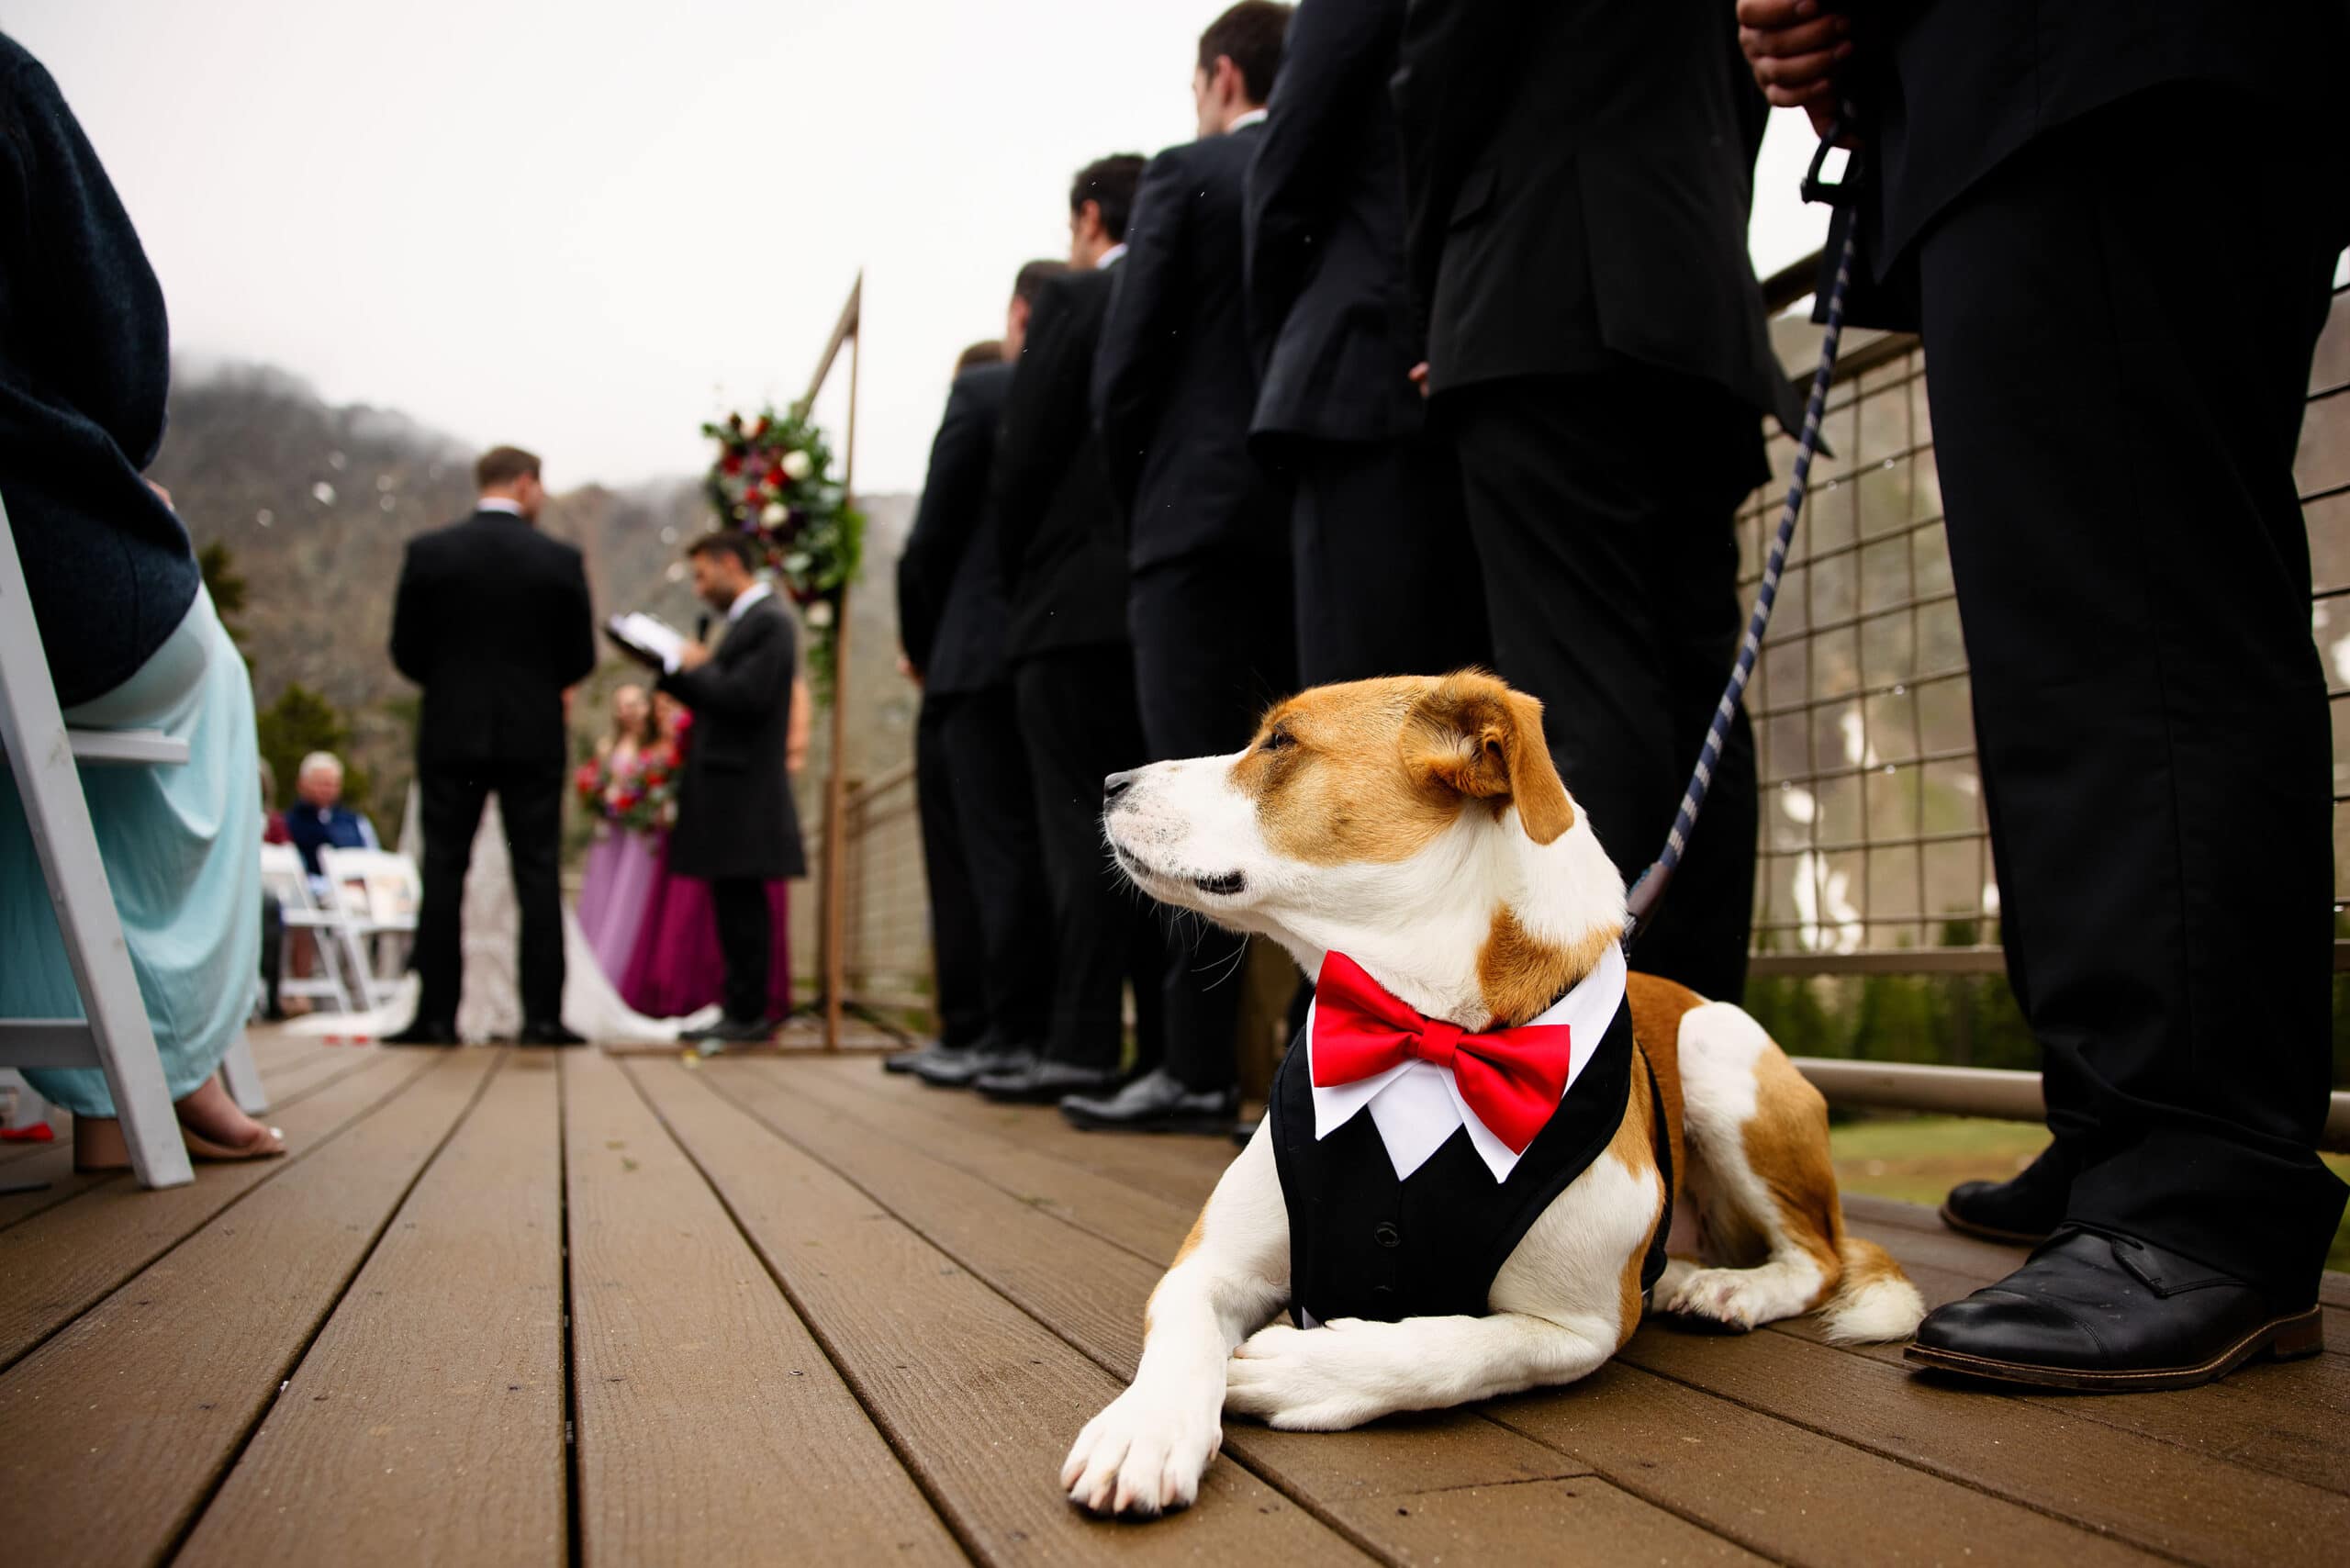 A dog watches a wedding ceremony at Araphoe Basin